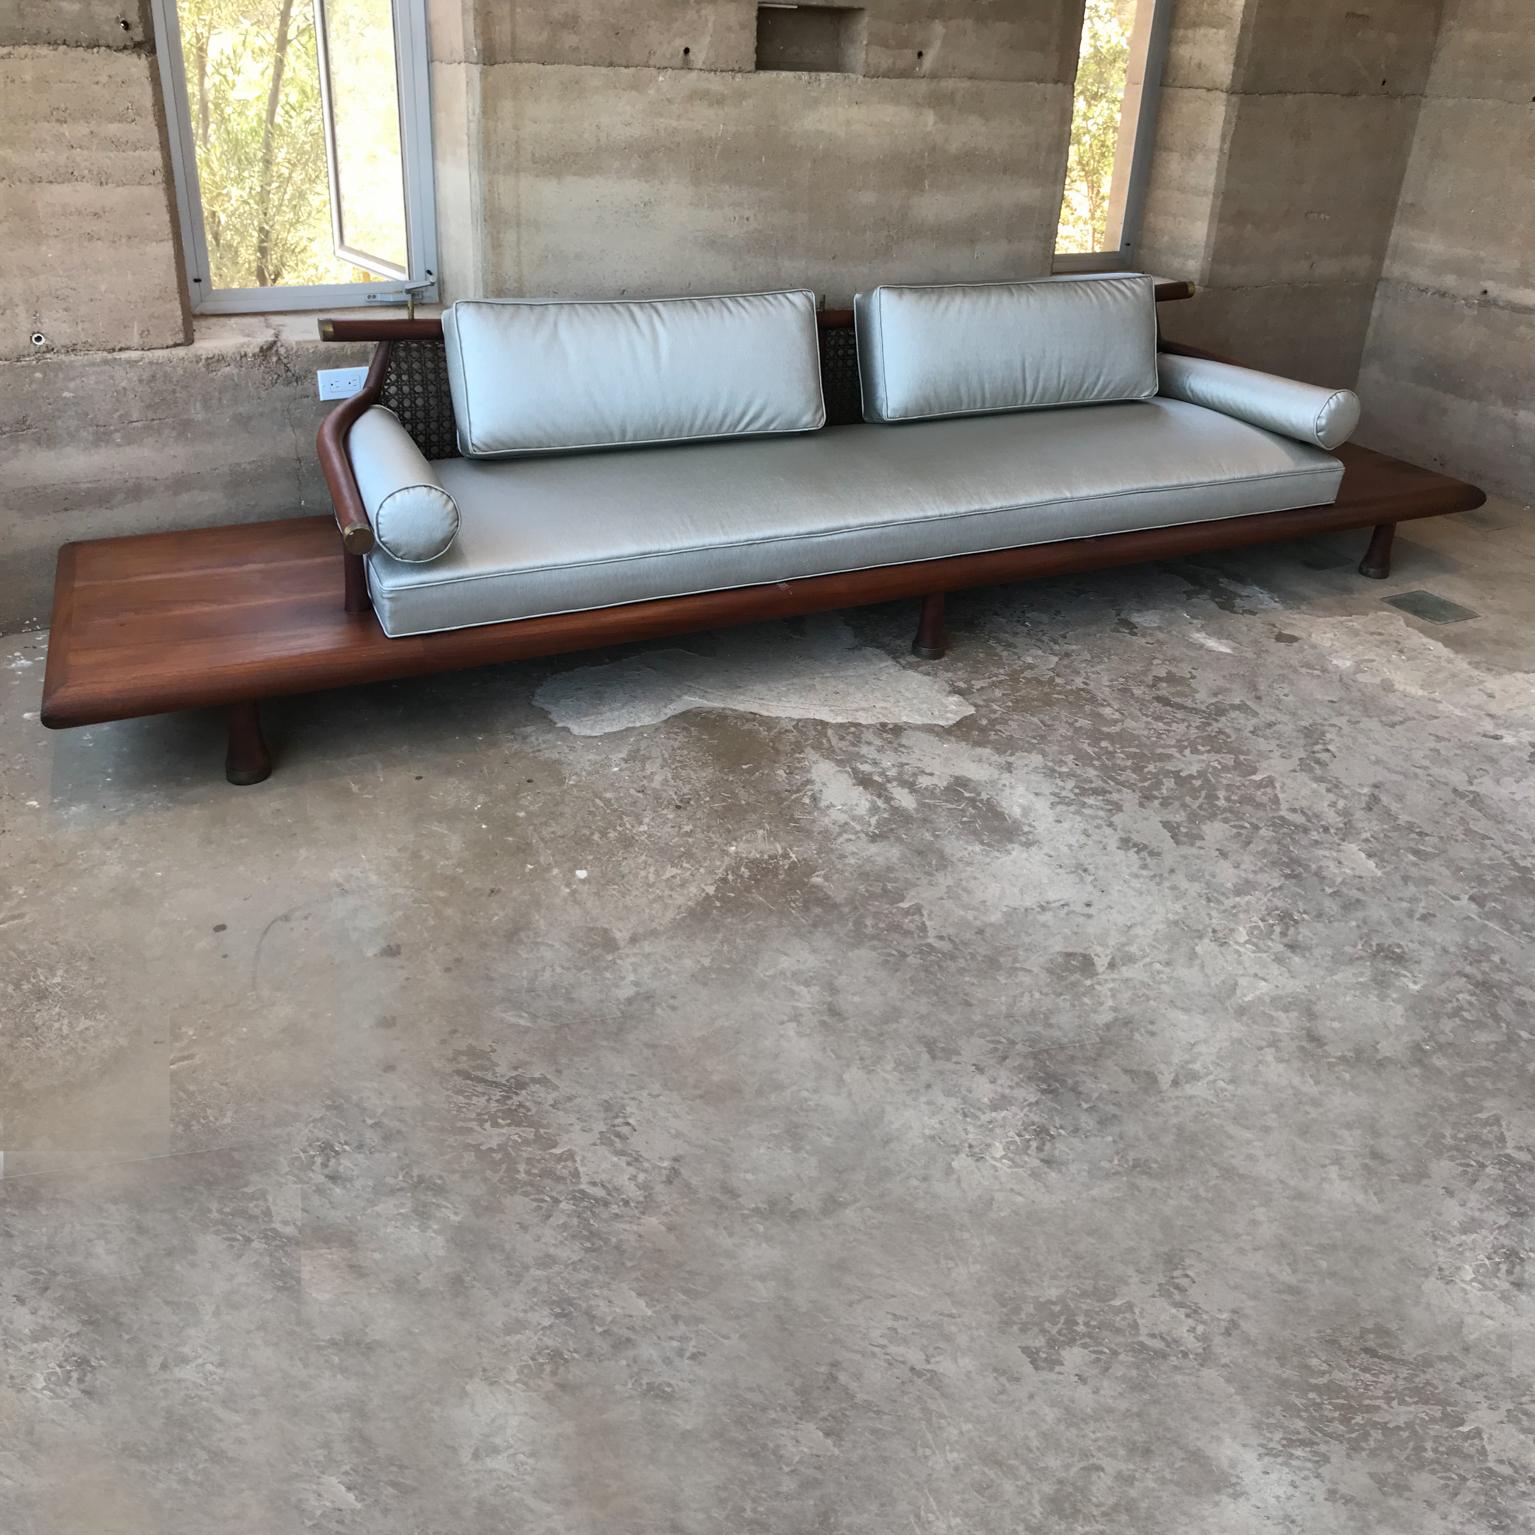 1950s Sensational mahogany sofa designed by Frank Kyle Mexico City
Asian inspired design. Mexico modernism at its finest. 
Mahogany wood, bronze, cane and upholstered cushions.
Built-in side tables. Low profile with amazing clean modern lines.